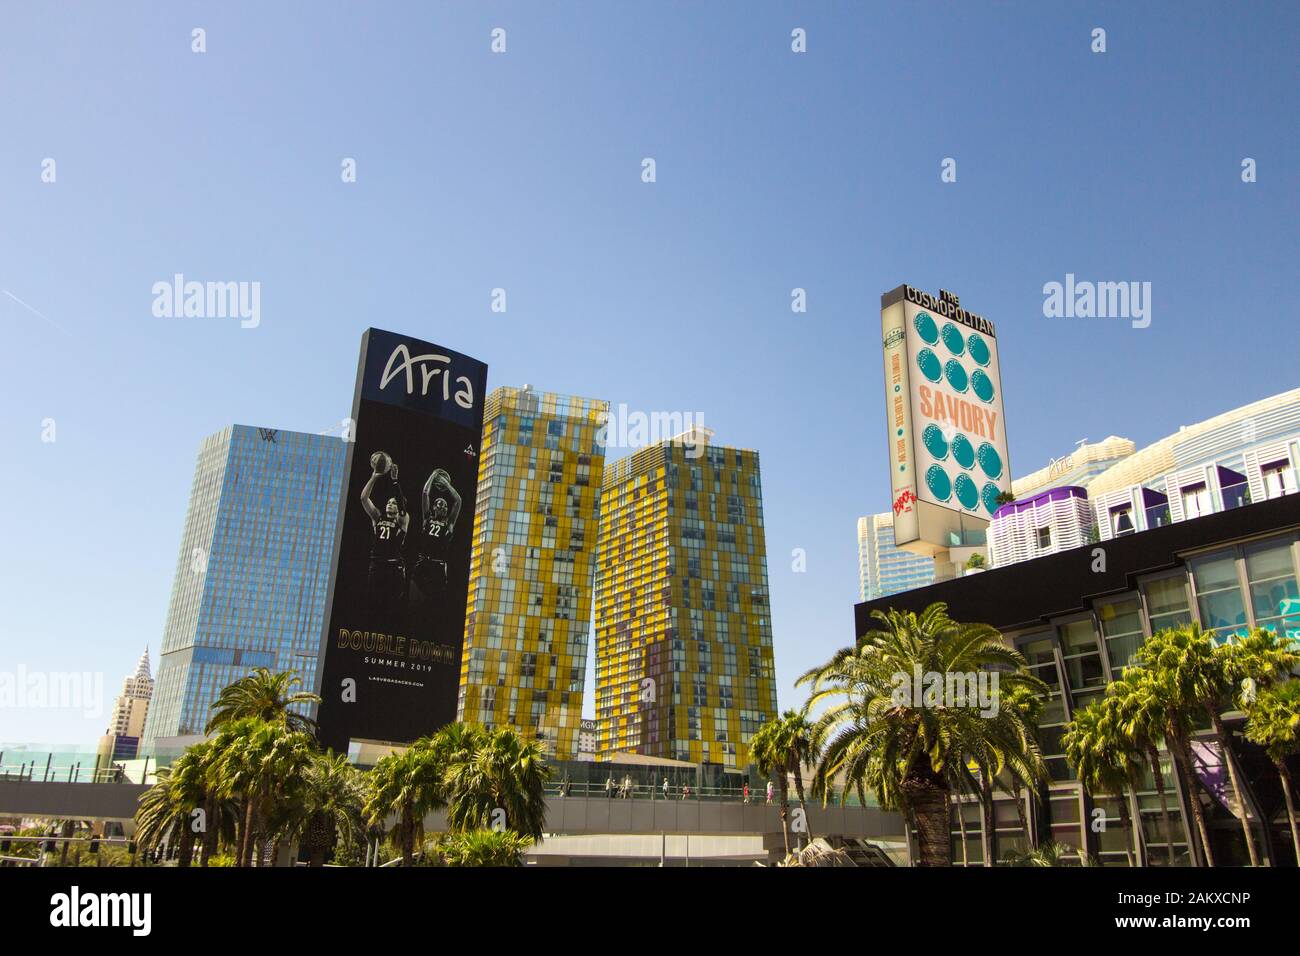 Las Vegas, Nevada - Exterior of the Aria resort in the City Center area of the Las Vegas Strip. Wide angle horizontal orientation during daylight hour Stock Photo